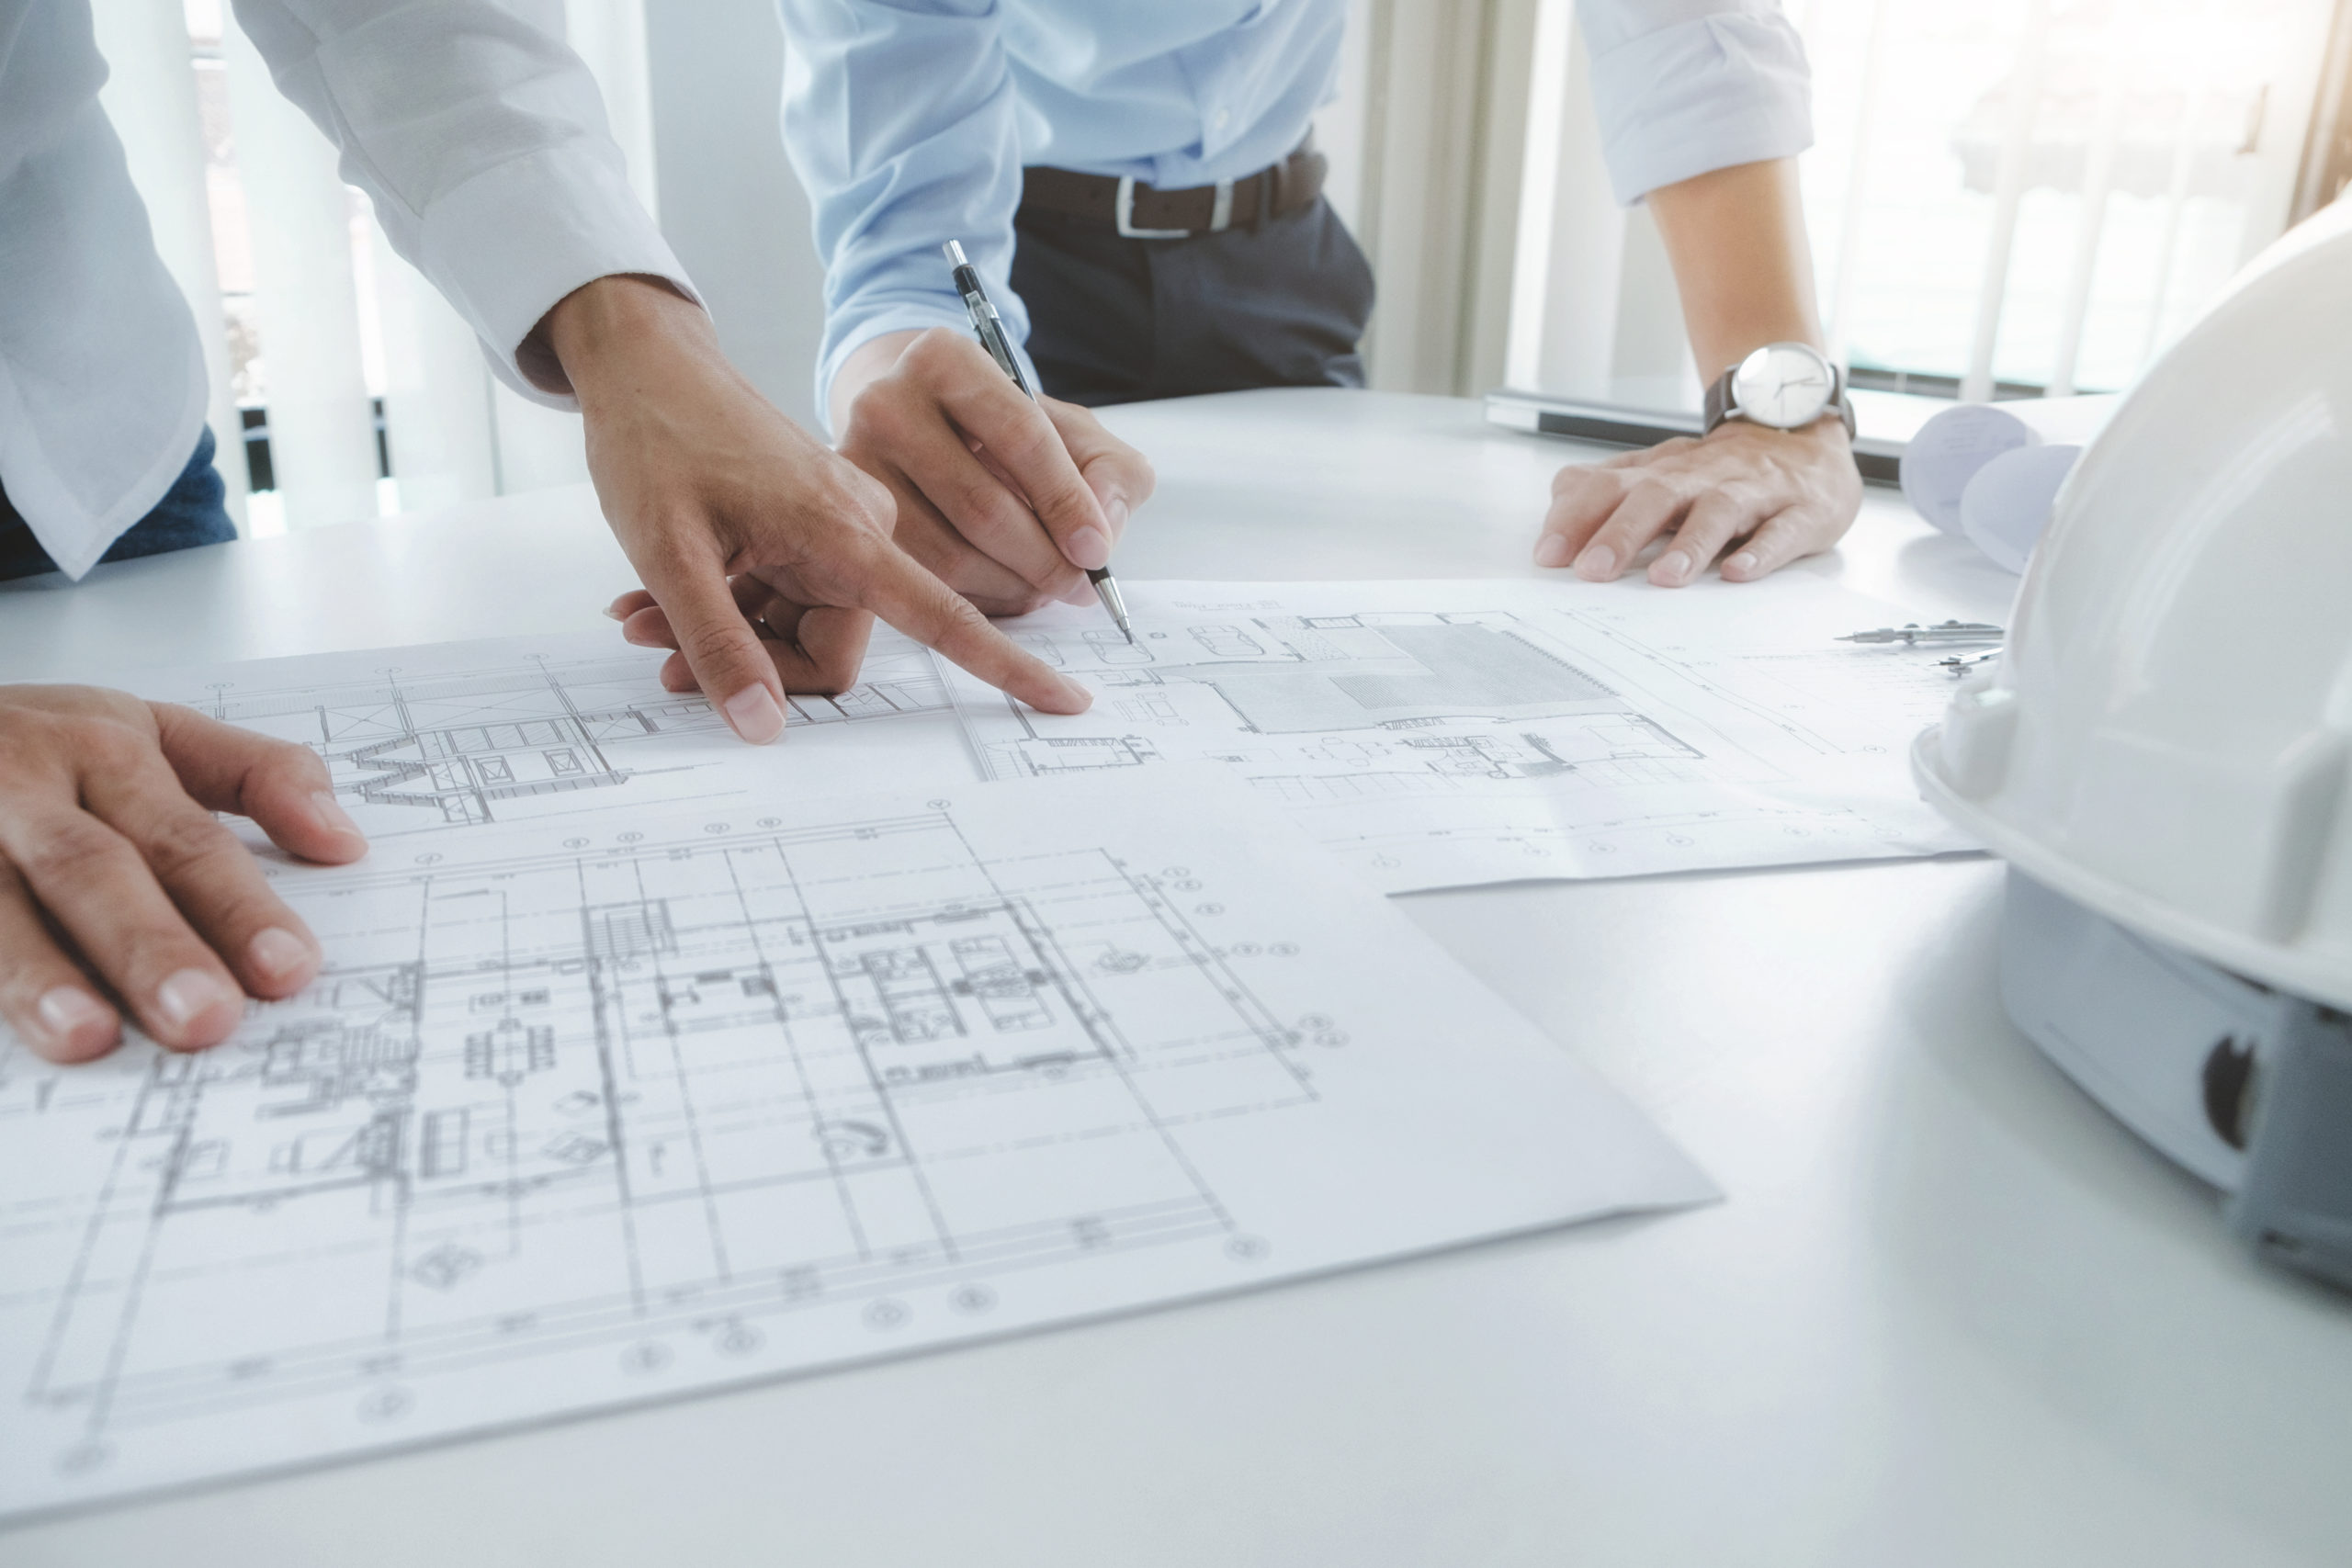 One hand is pointing at the designs for a building on white paper while another set of hands writes on a different sheet of plans.